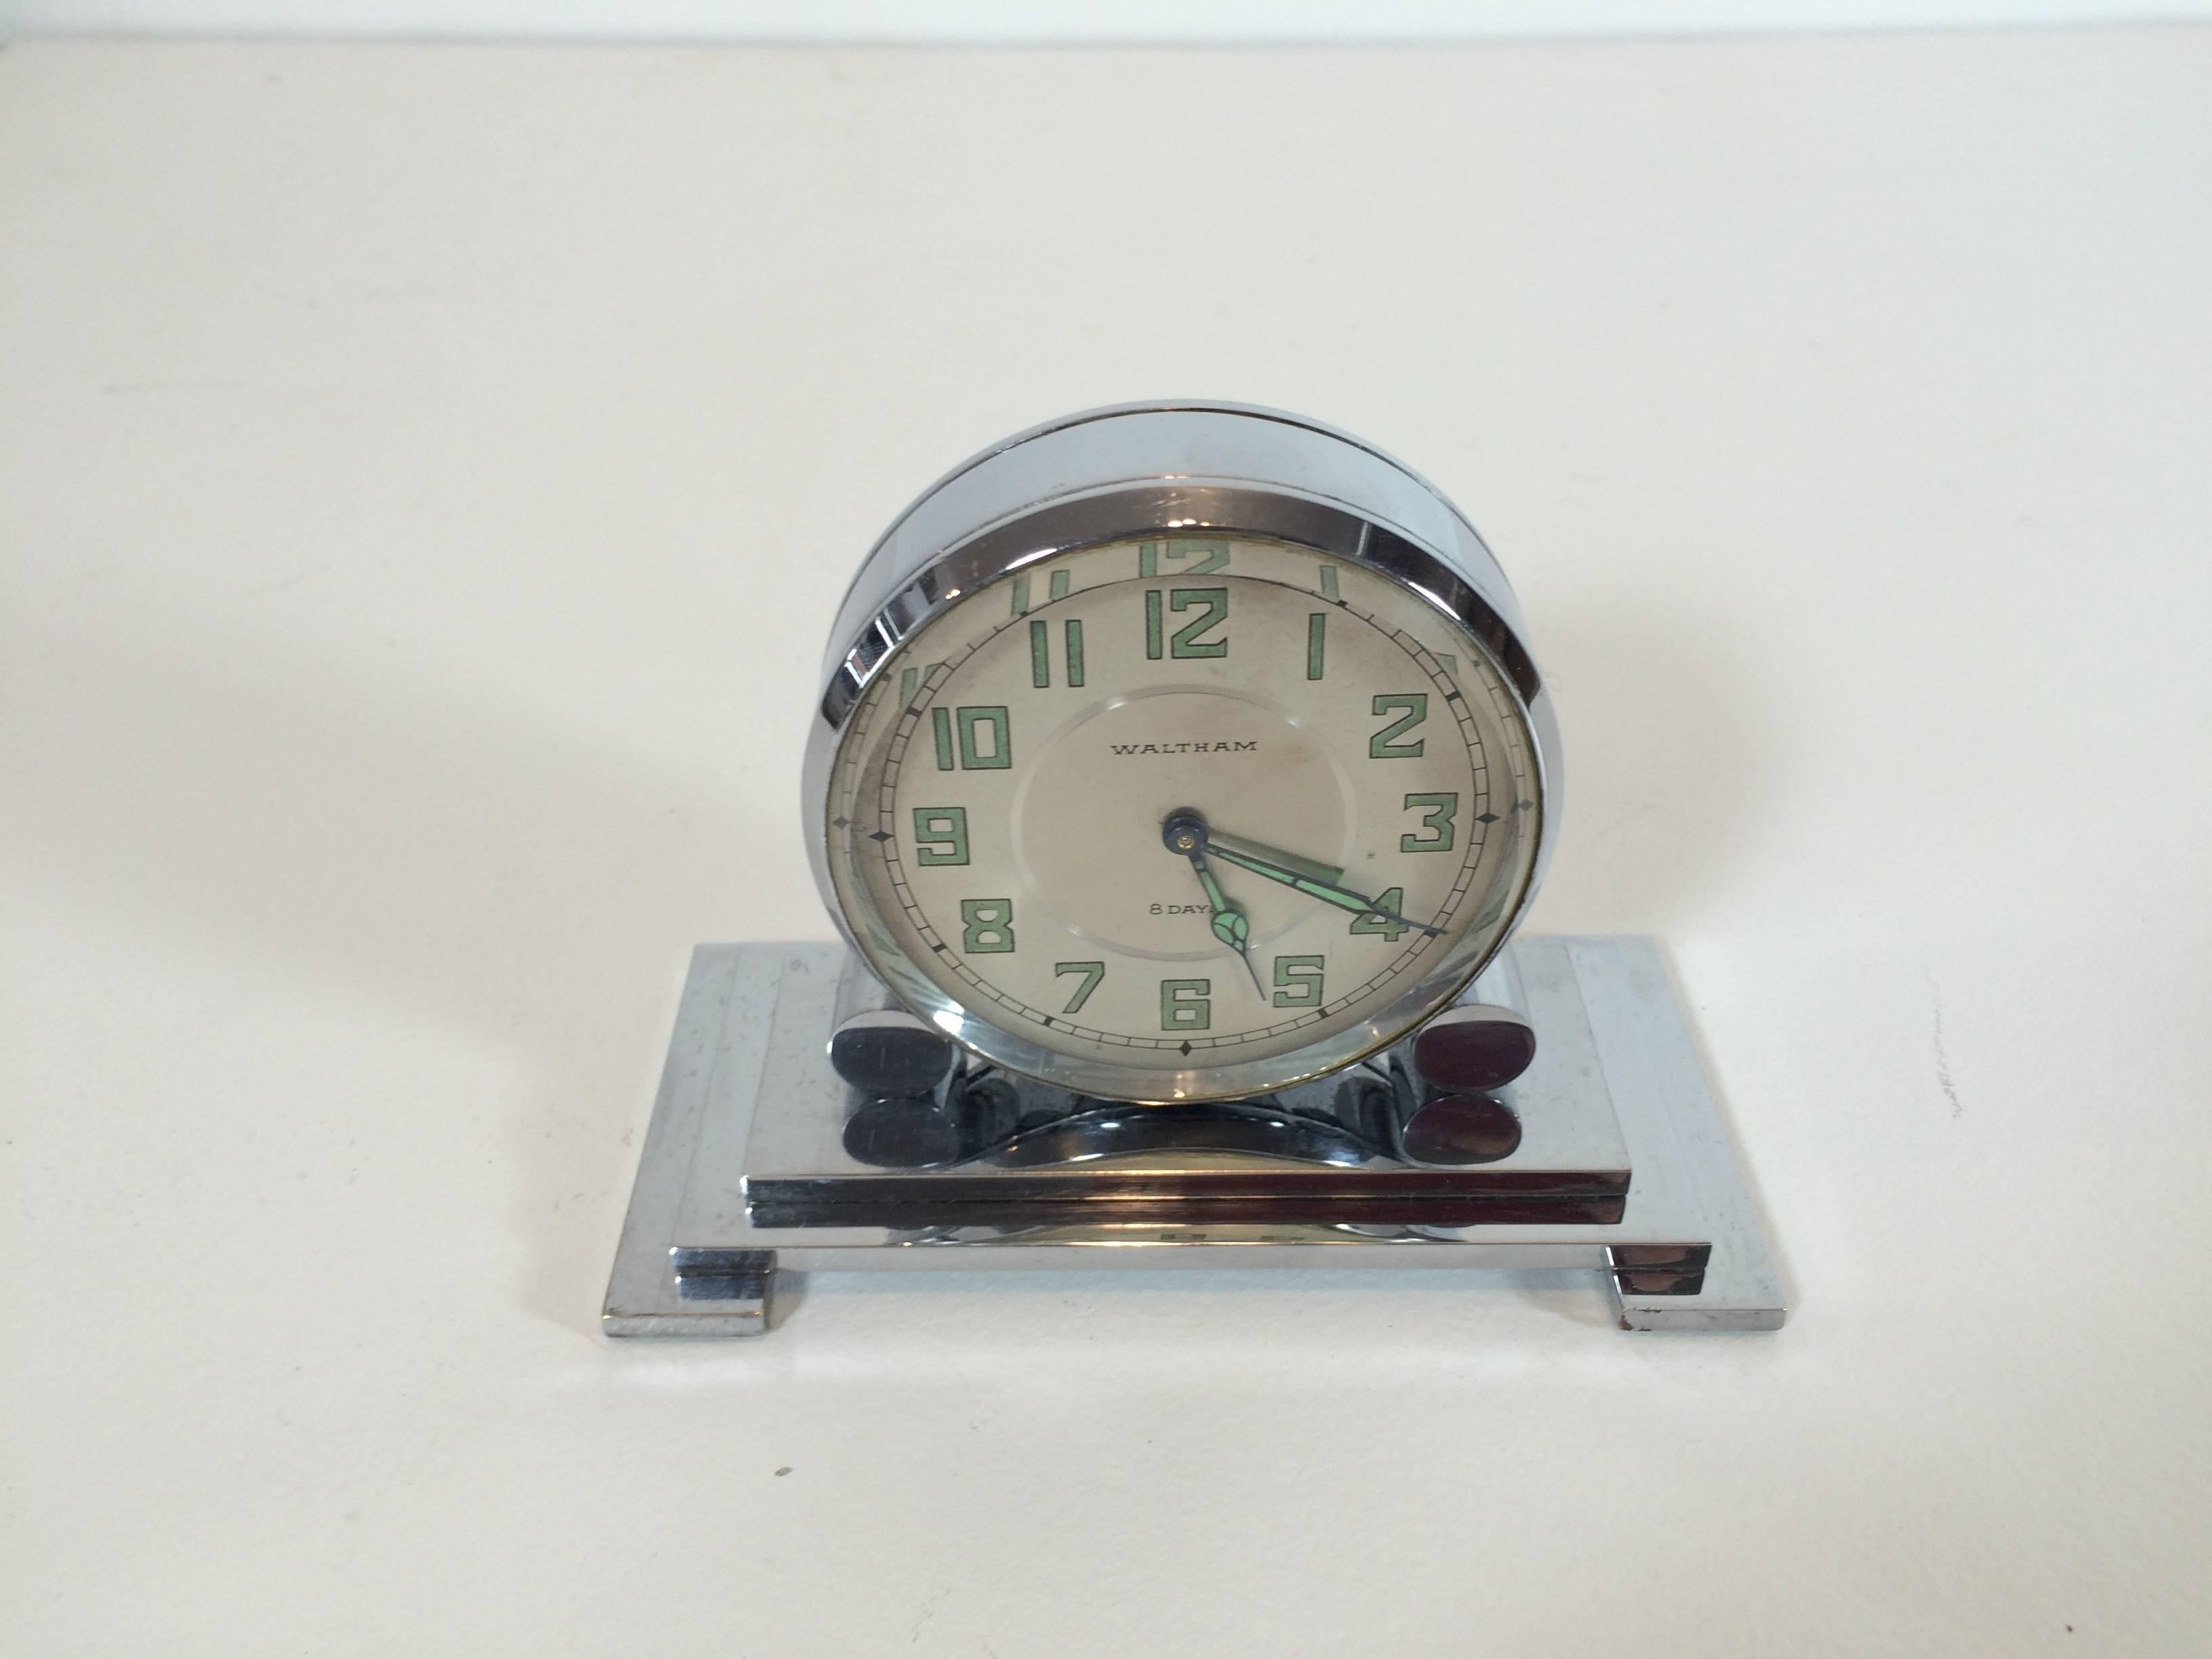 Beautiful Art Deco partners desk clock in heavy nickel plated brass made by Waltham Clock Company ca 1930s. With a clock face on both sides of the clock, partners working at a desk face to face could always tell the time without turning the